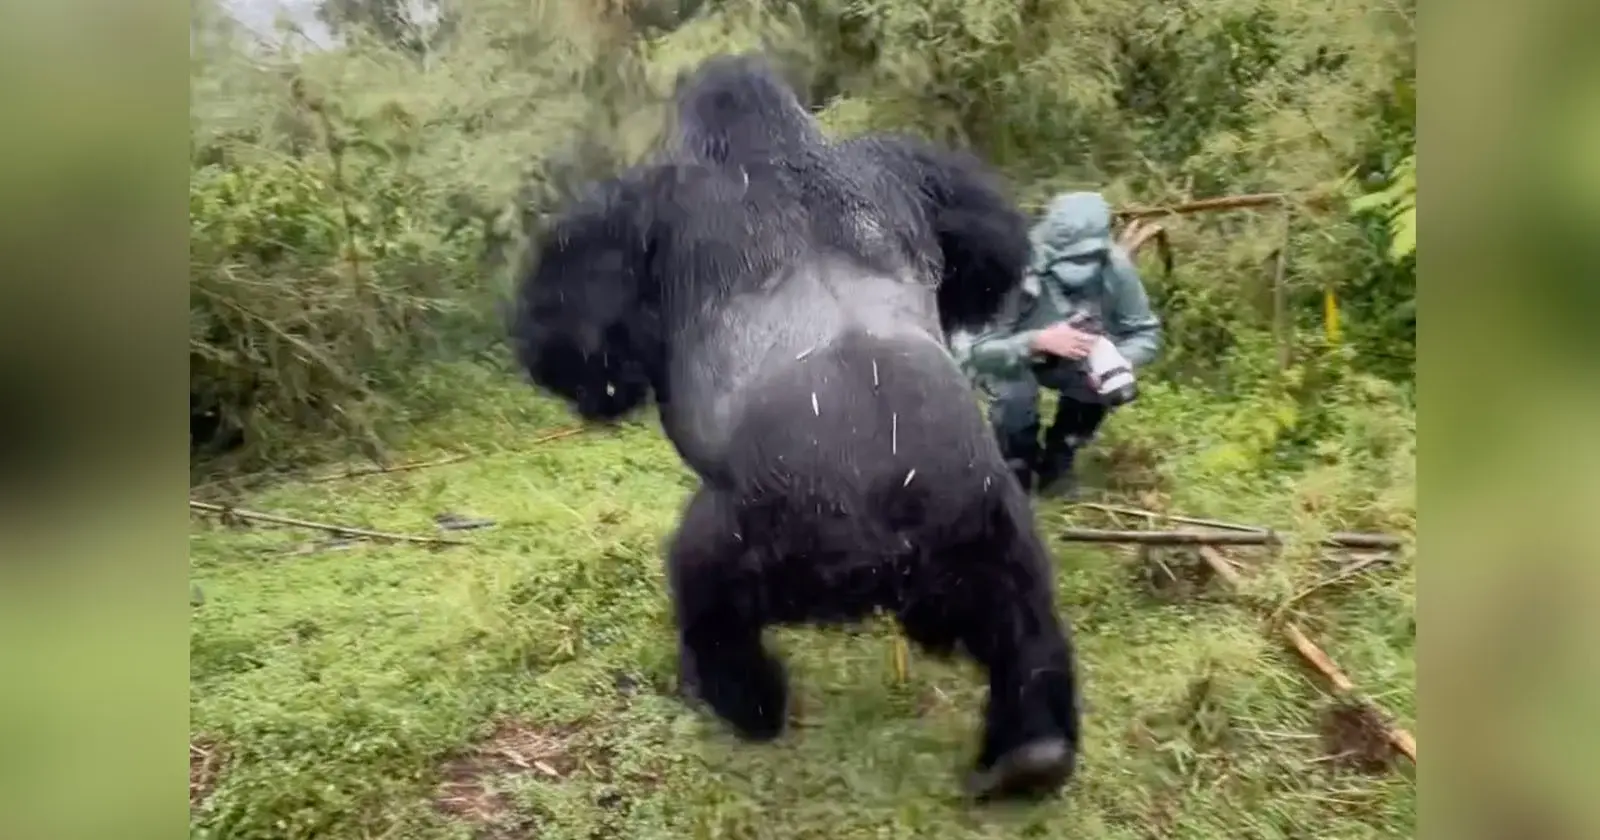 Silverback Gorilla’s Powerful Chest-Pounding Display Before the Watchful Eye of a Wildlife Photographer